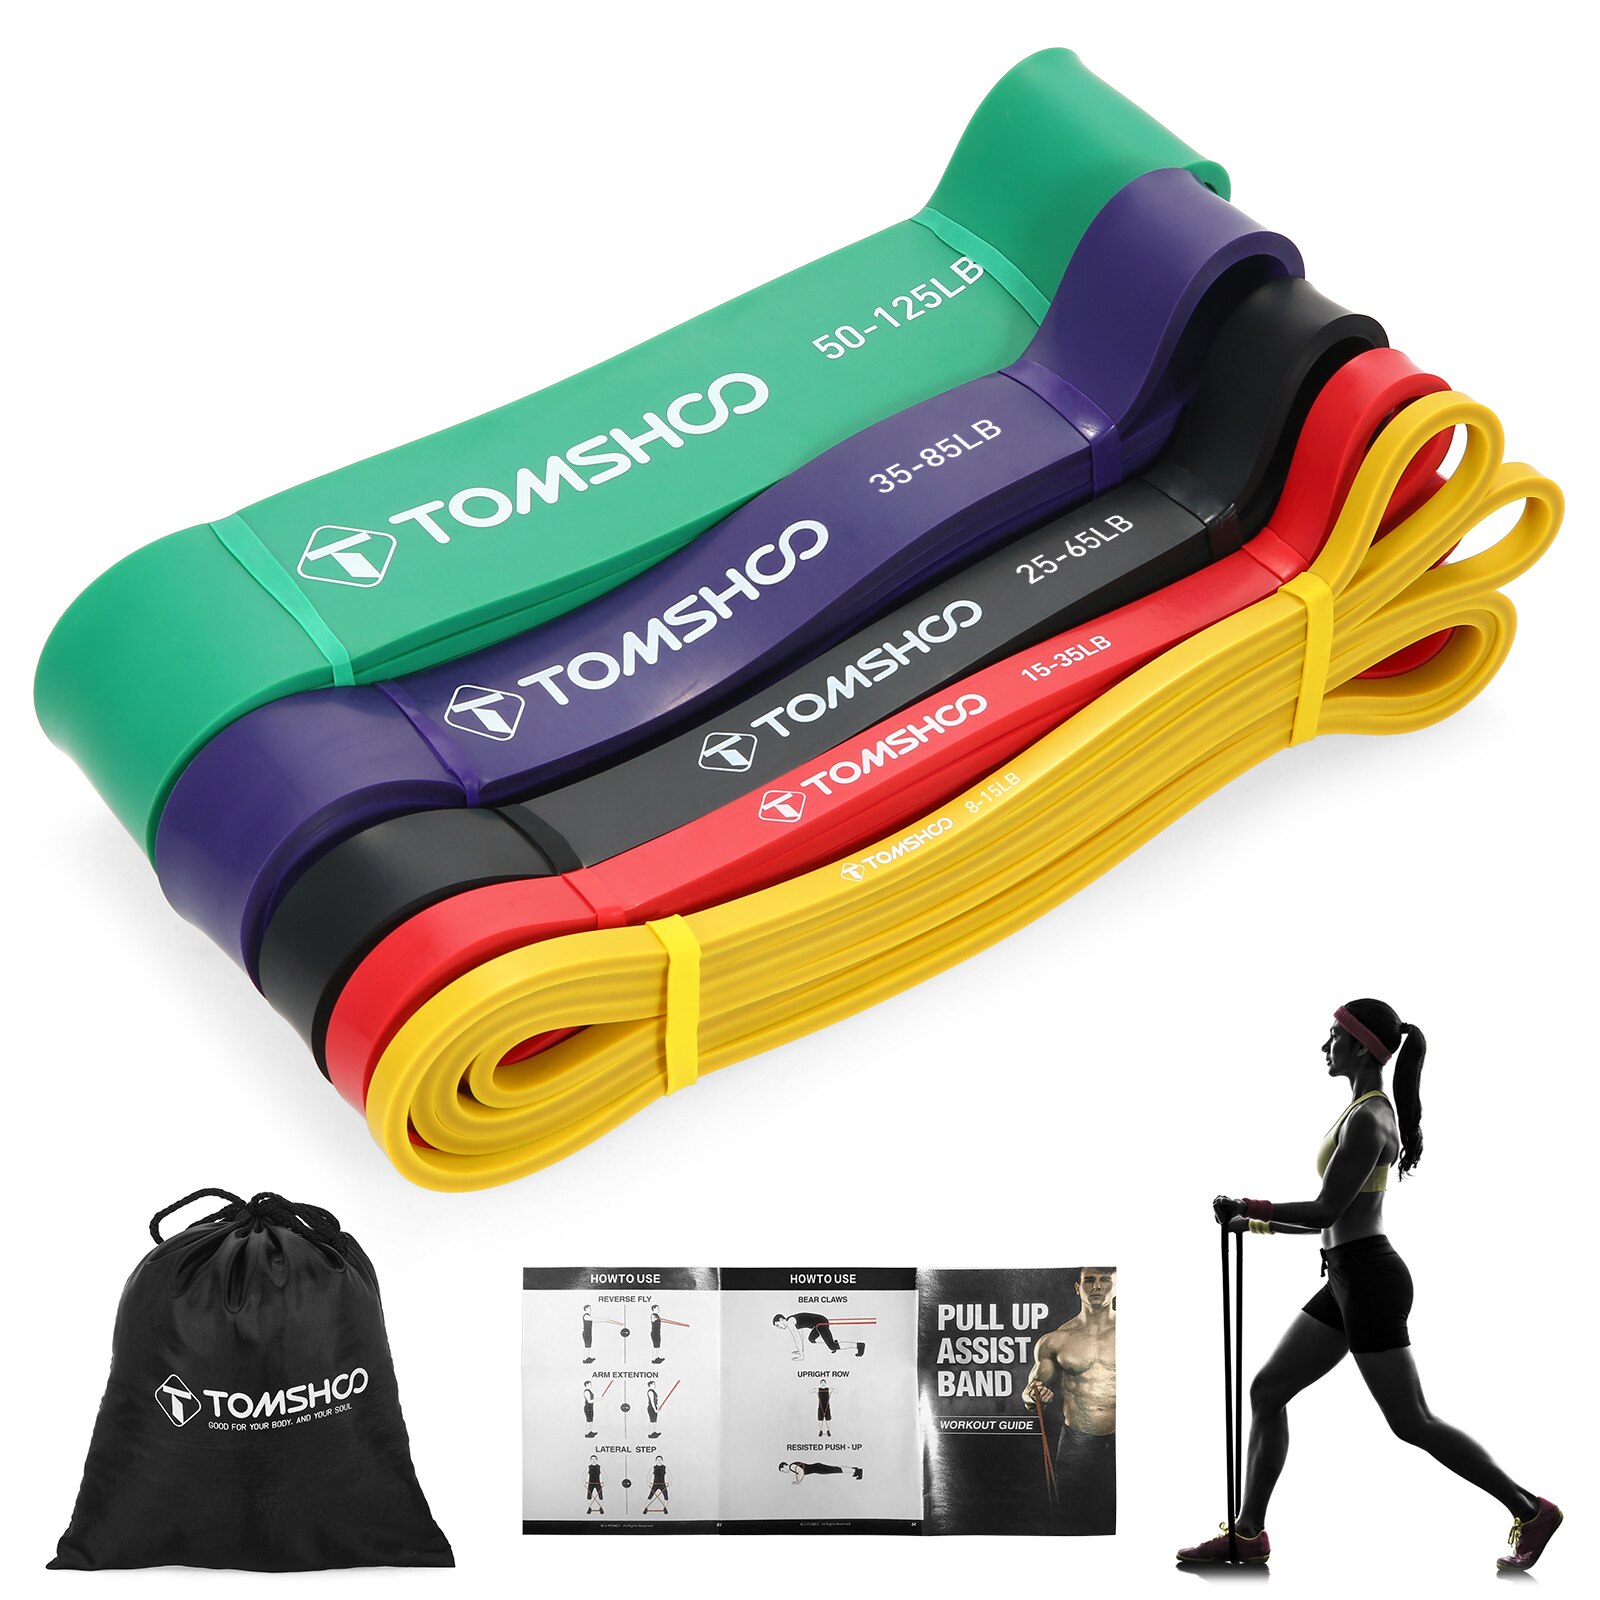 Tomshoo Oefening Band Pull Up Assist Bands Set Resistance Loop Bands Powerlifting Workout Oefening Stretch Bands Met Draagtas